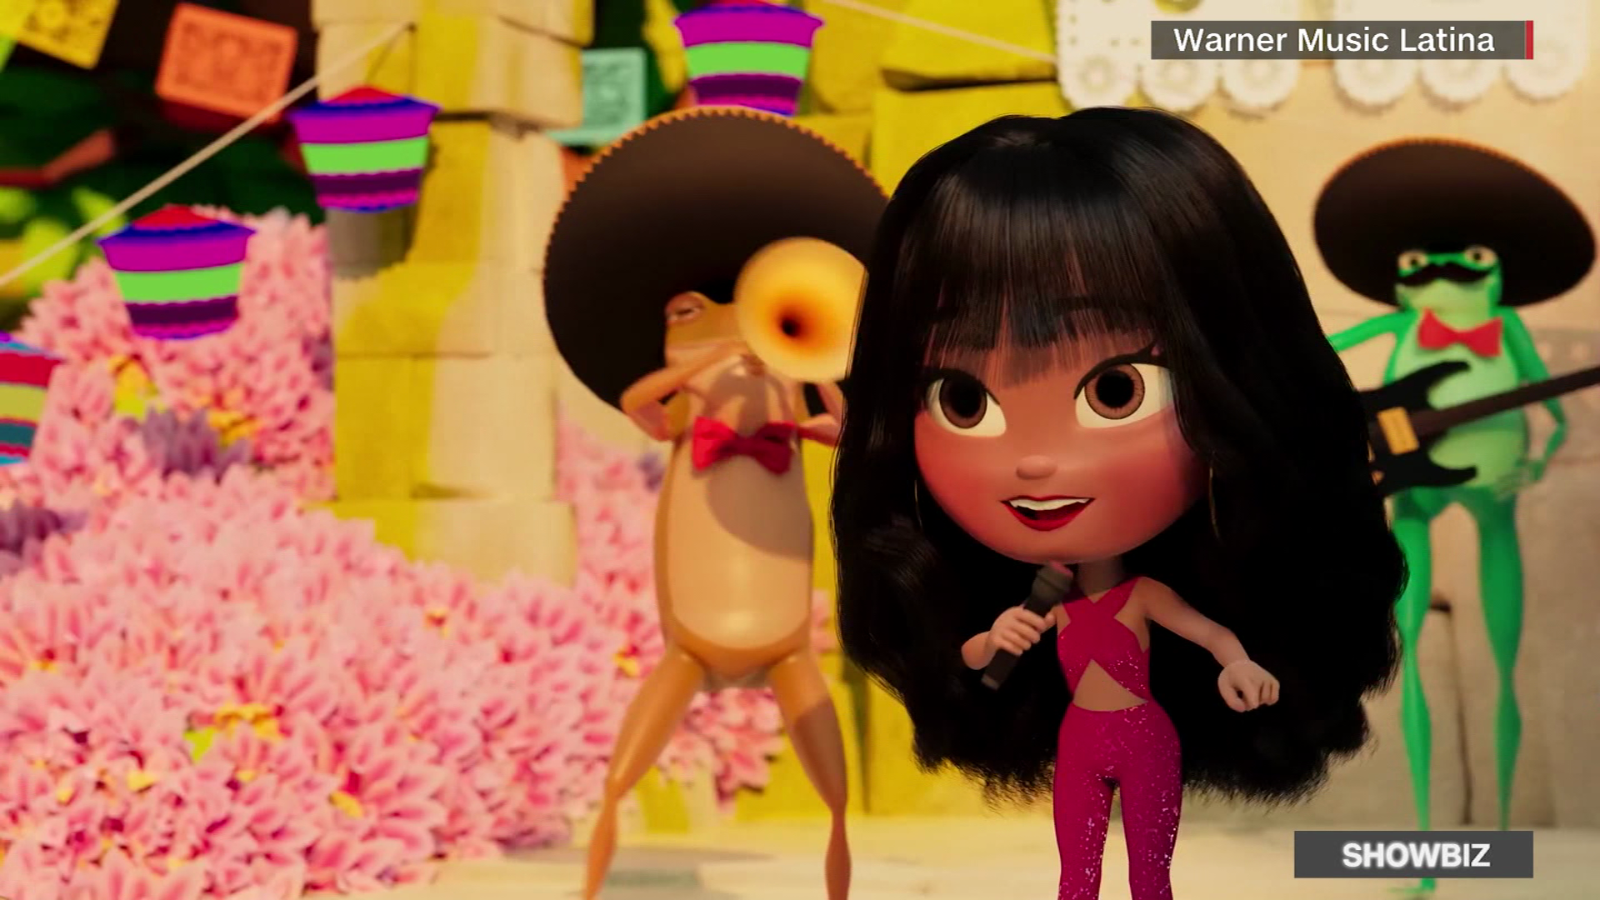 Selena Quintanilla's first animated music video released: 